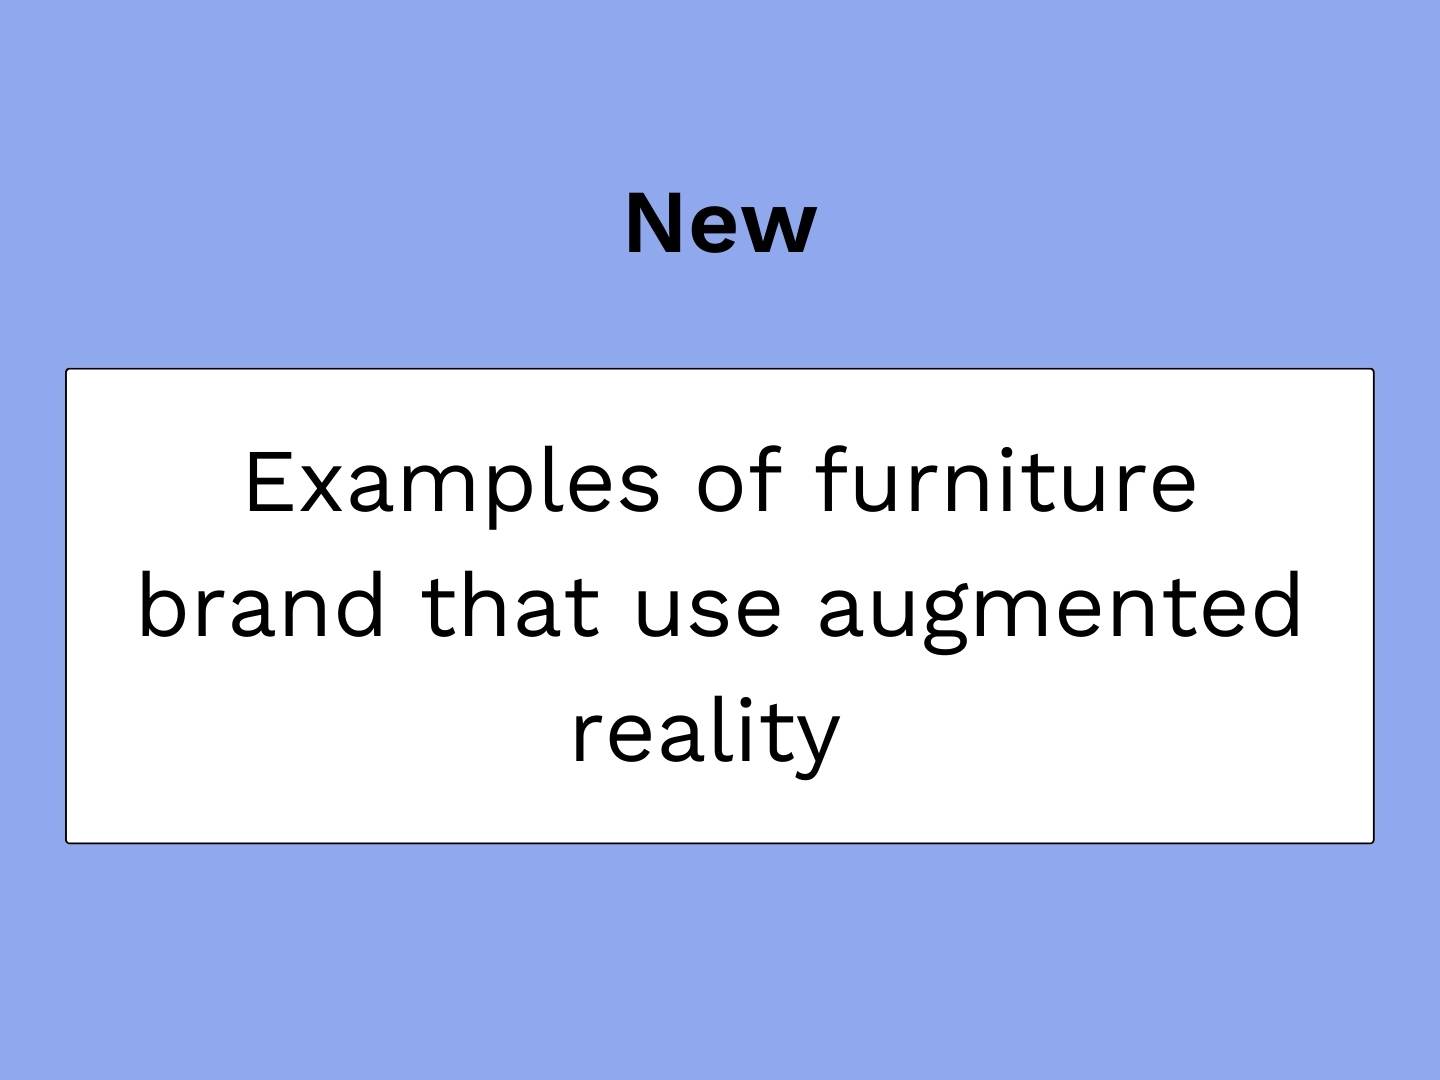 vignette blog article on furniture brands using augmented reality